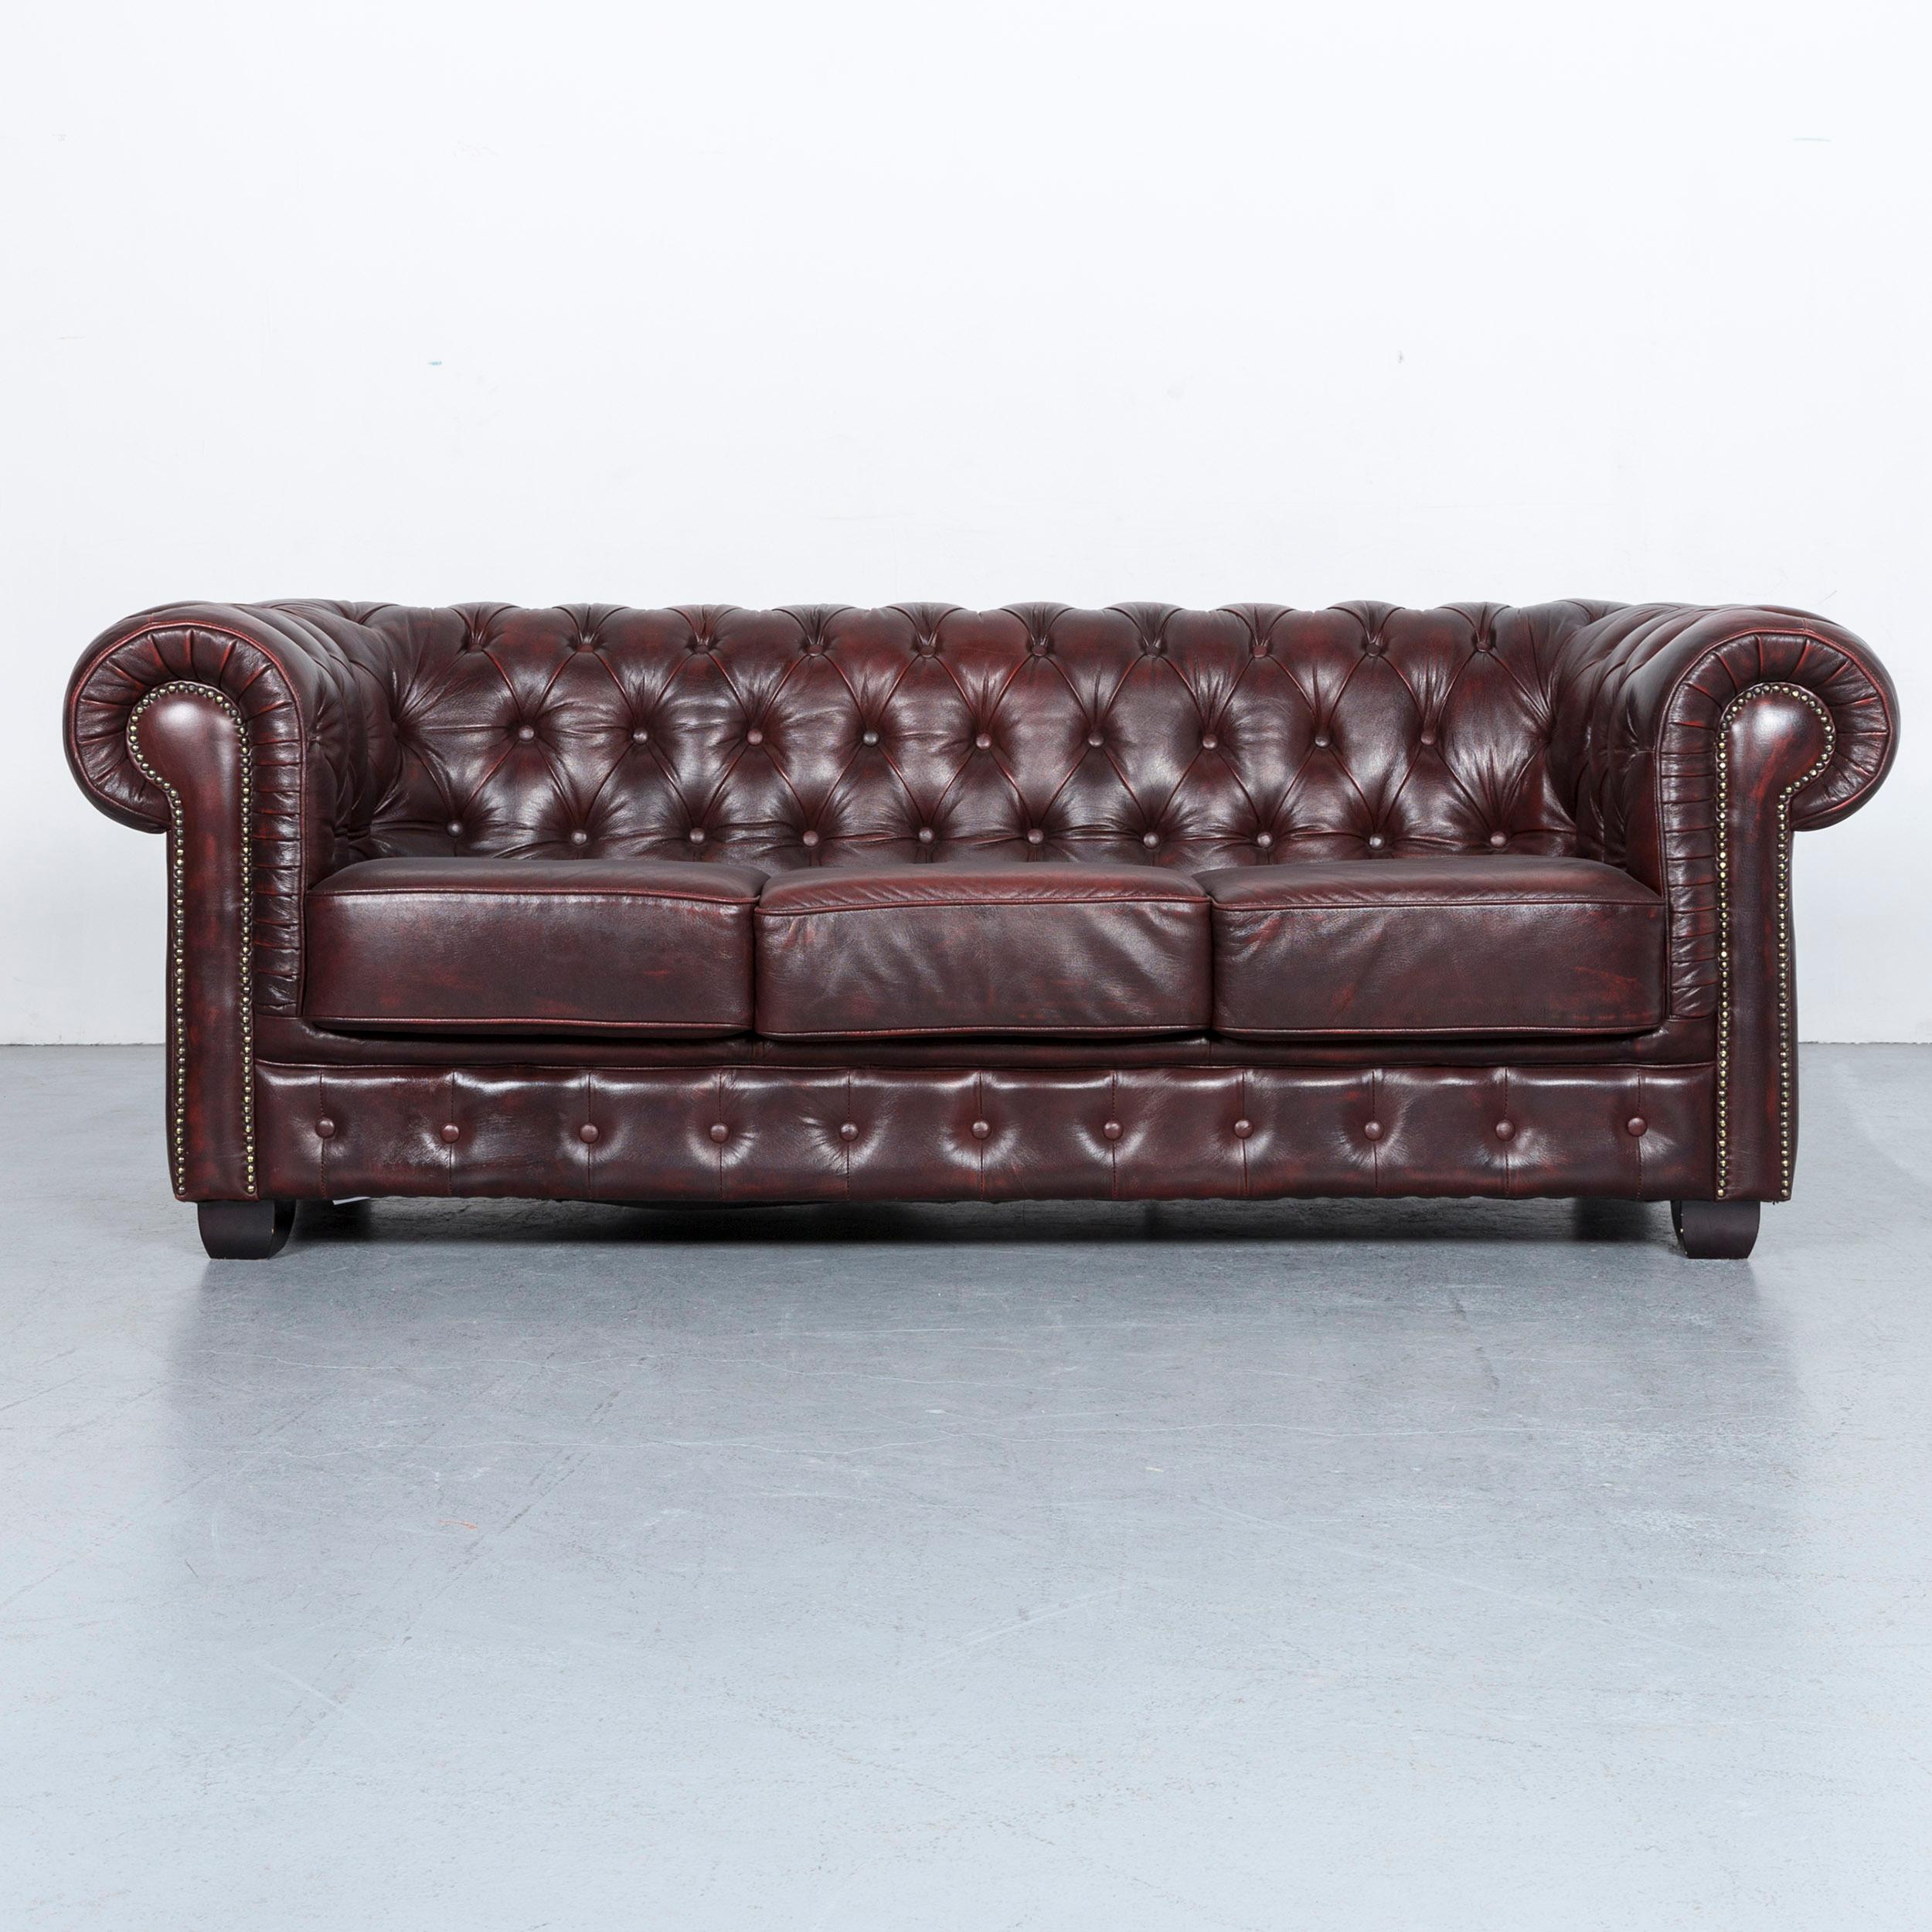 We bring to you an Chesterfield leather sofa set brown three-seat, two-seat couch vintage retro.























